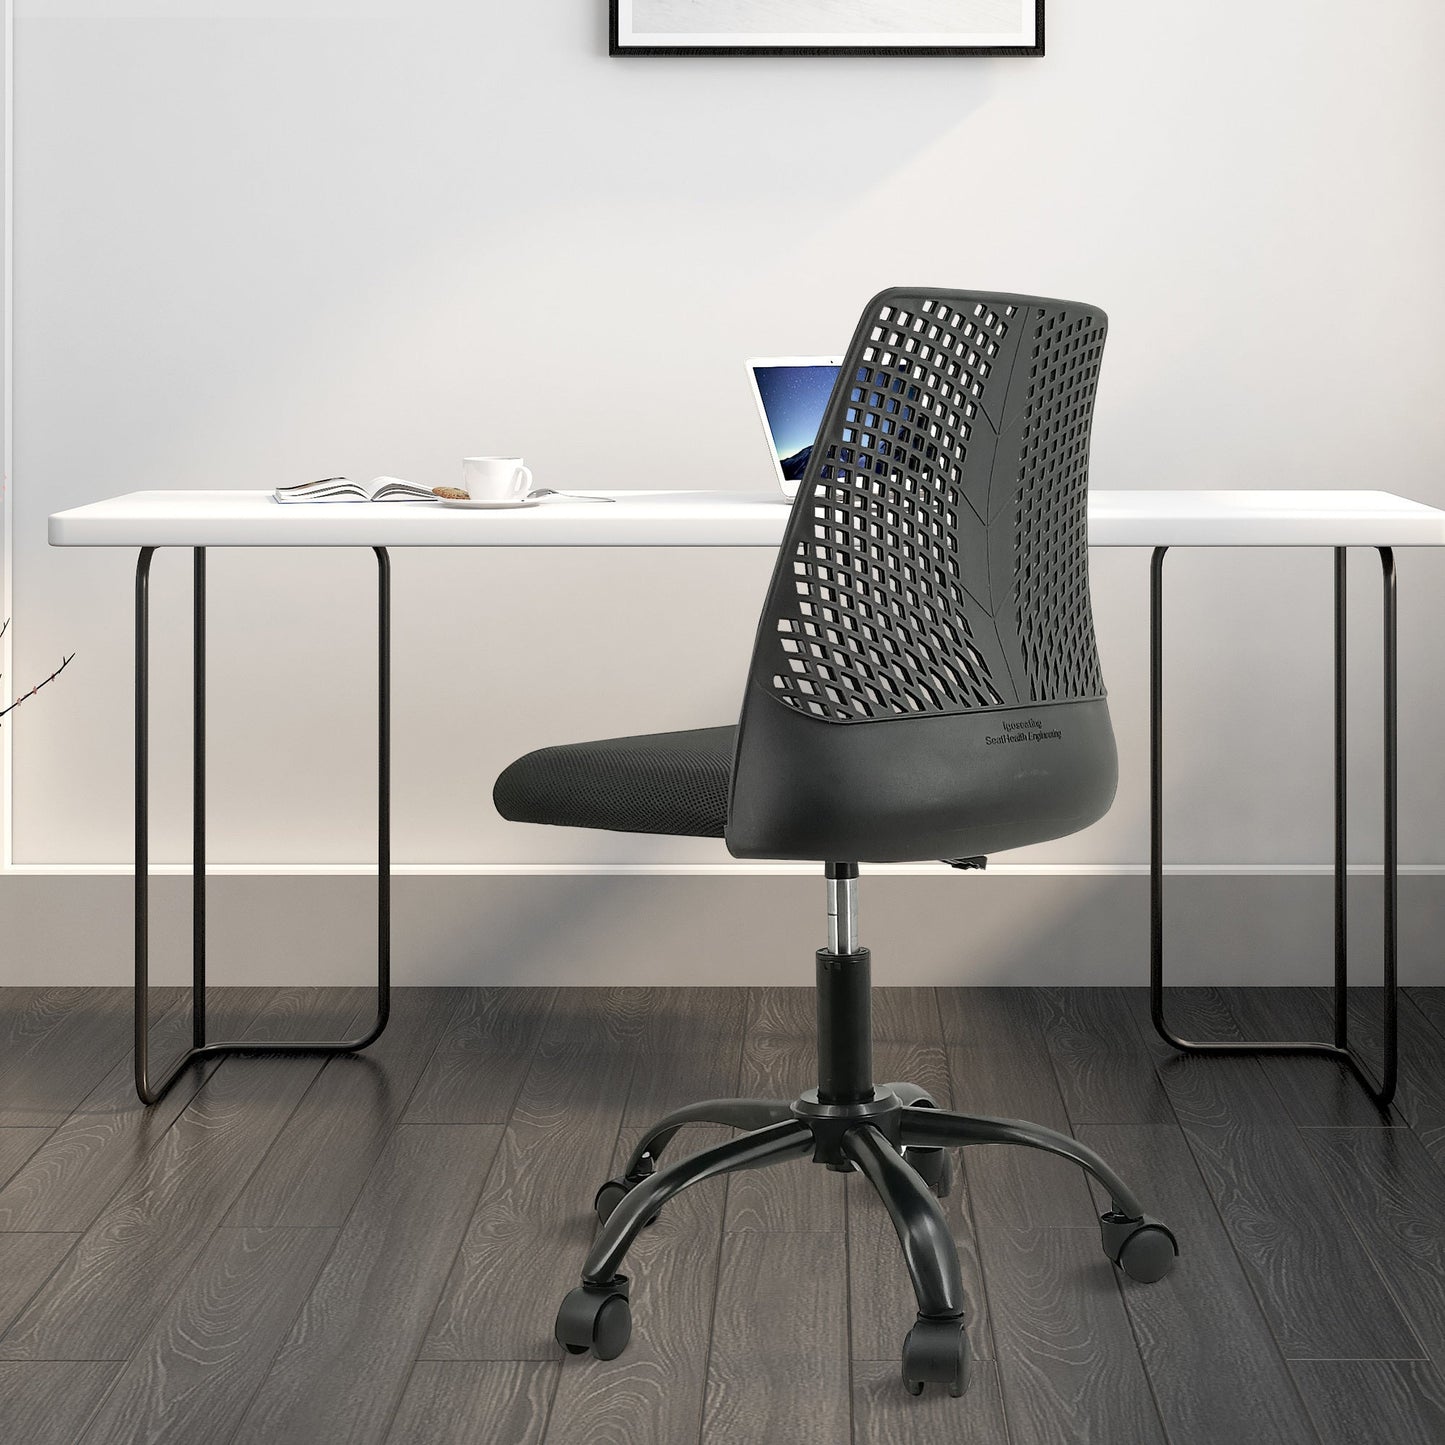 Ergonomic Office and Home Chair with Supportive Cushioning, Black